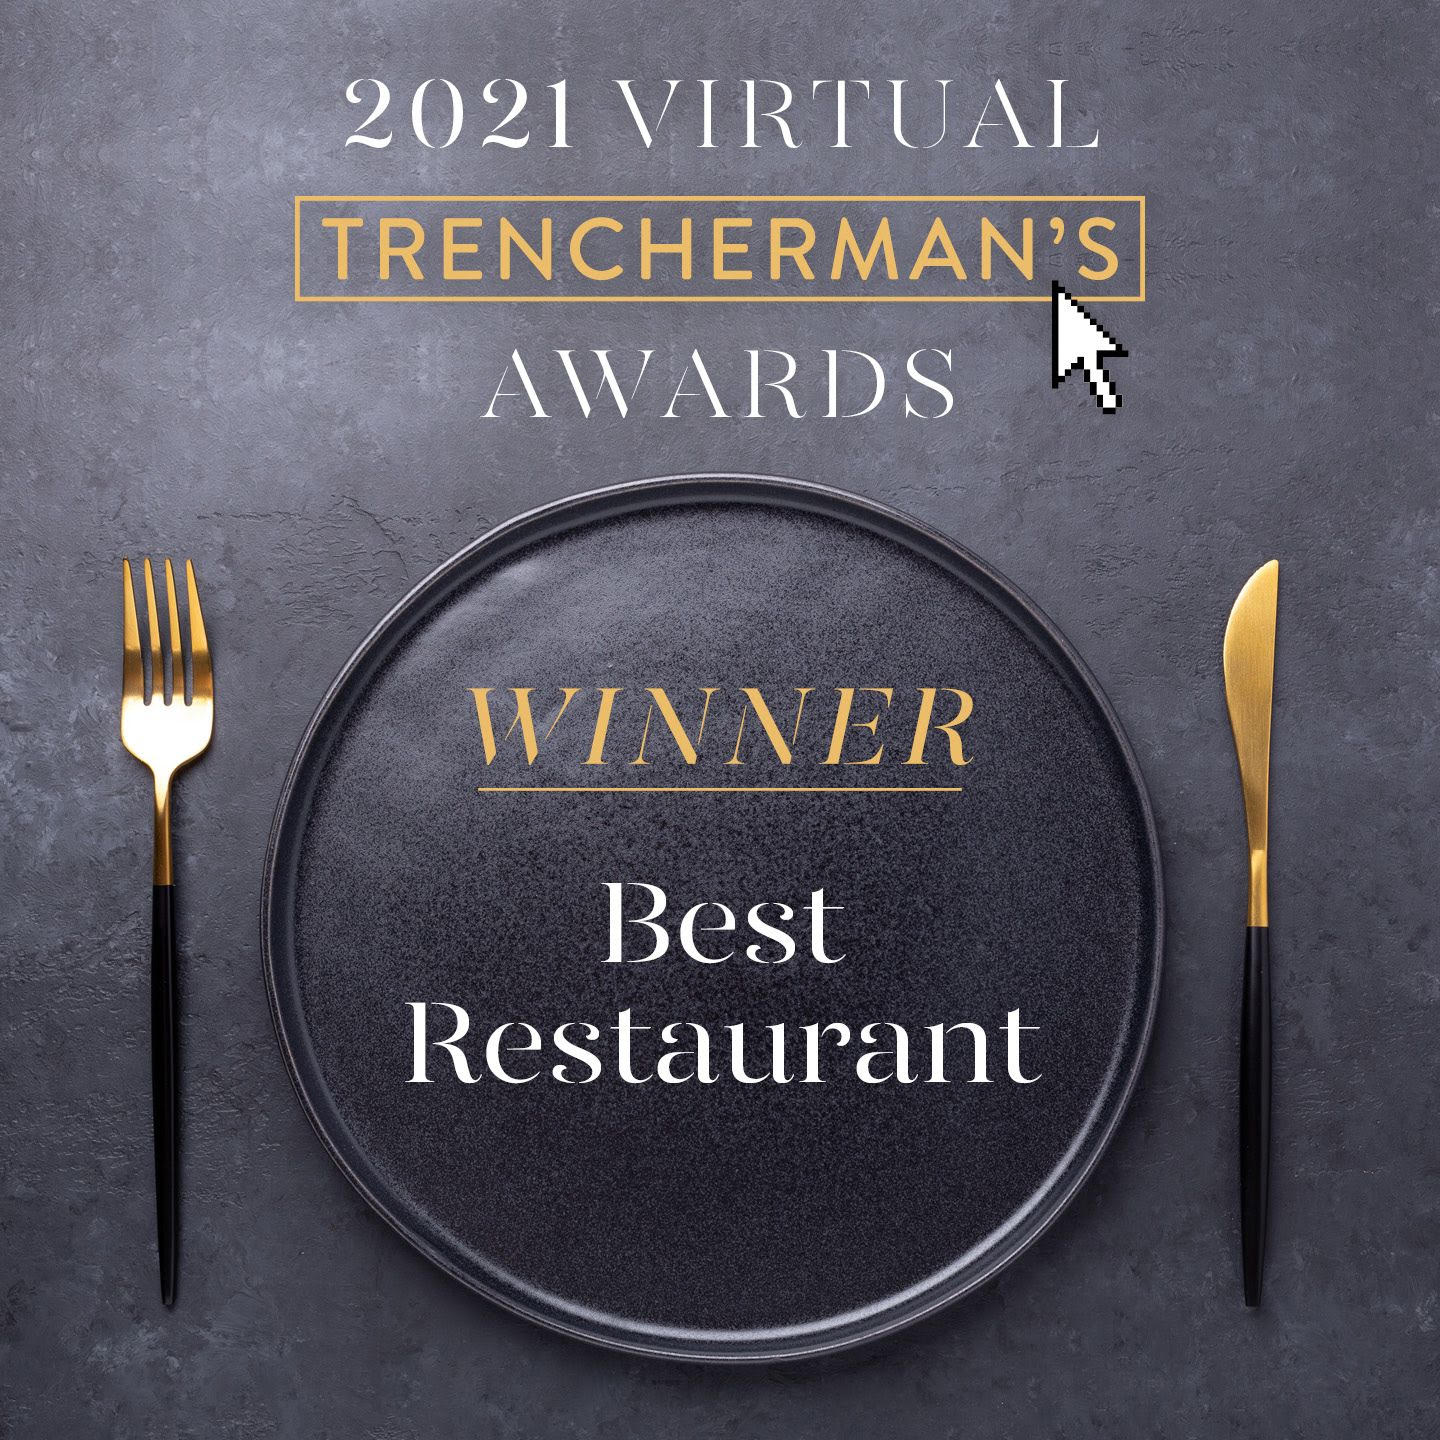 Best Restaurant in the South West, Trencherman’s Guide awards 2021